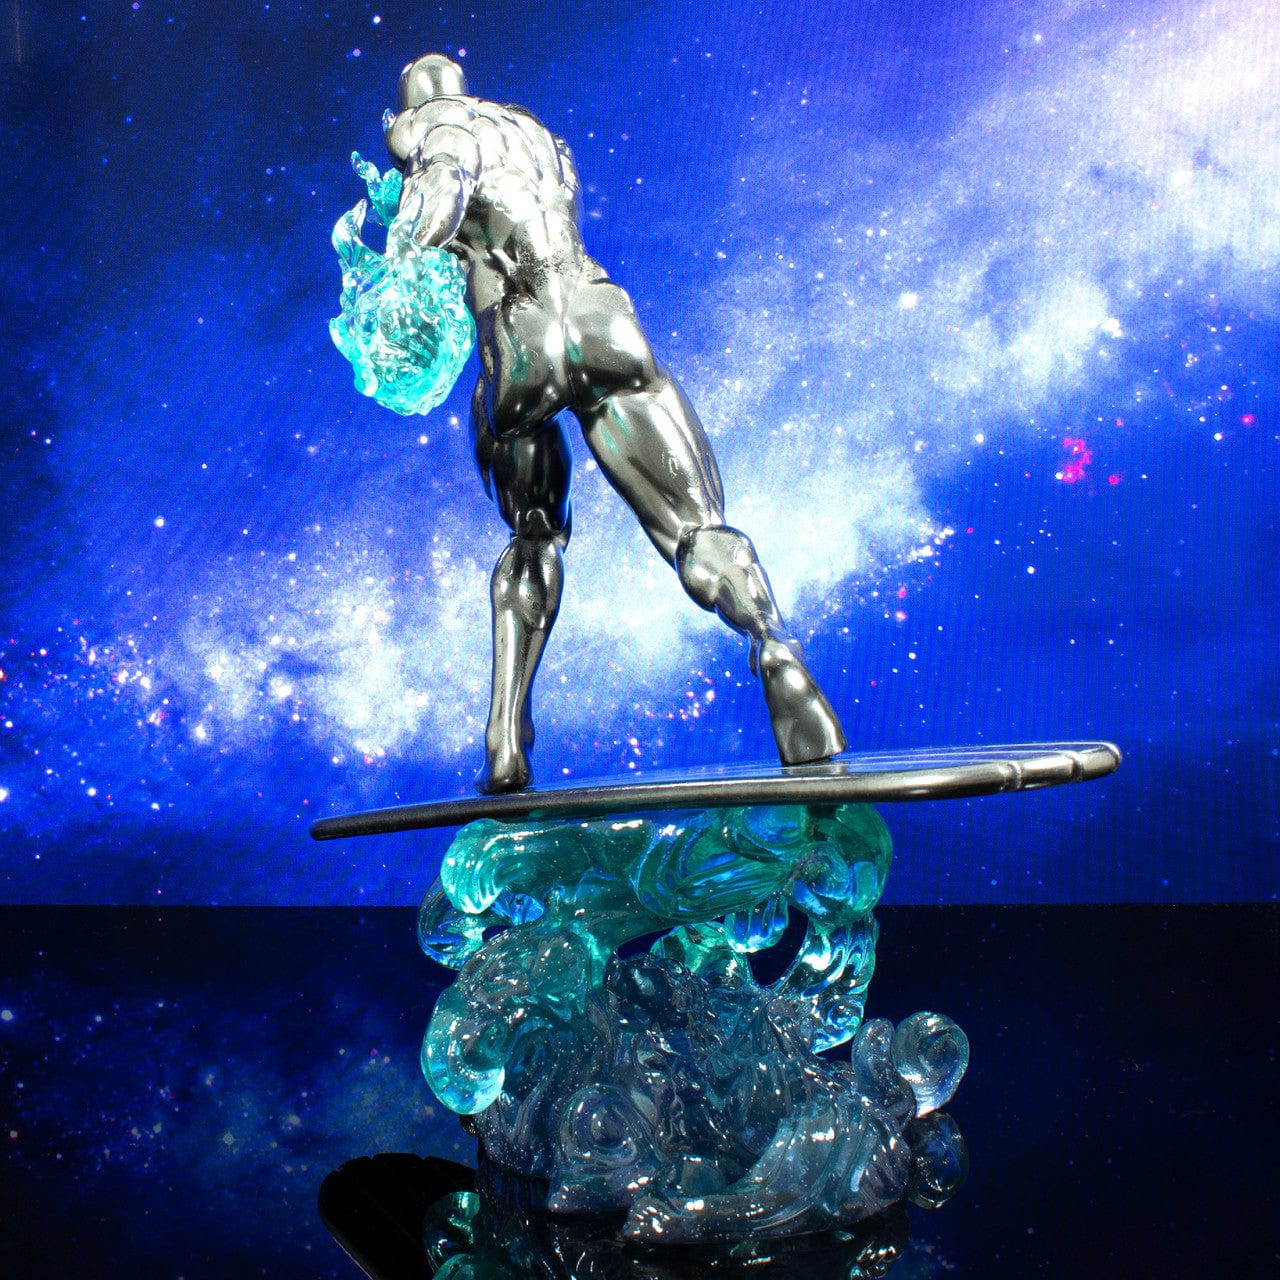 Diamond Select Toys Marvel Gallery Silver Surfer Statue Diorama